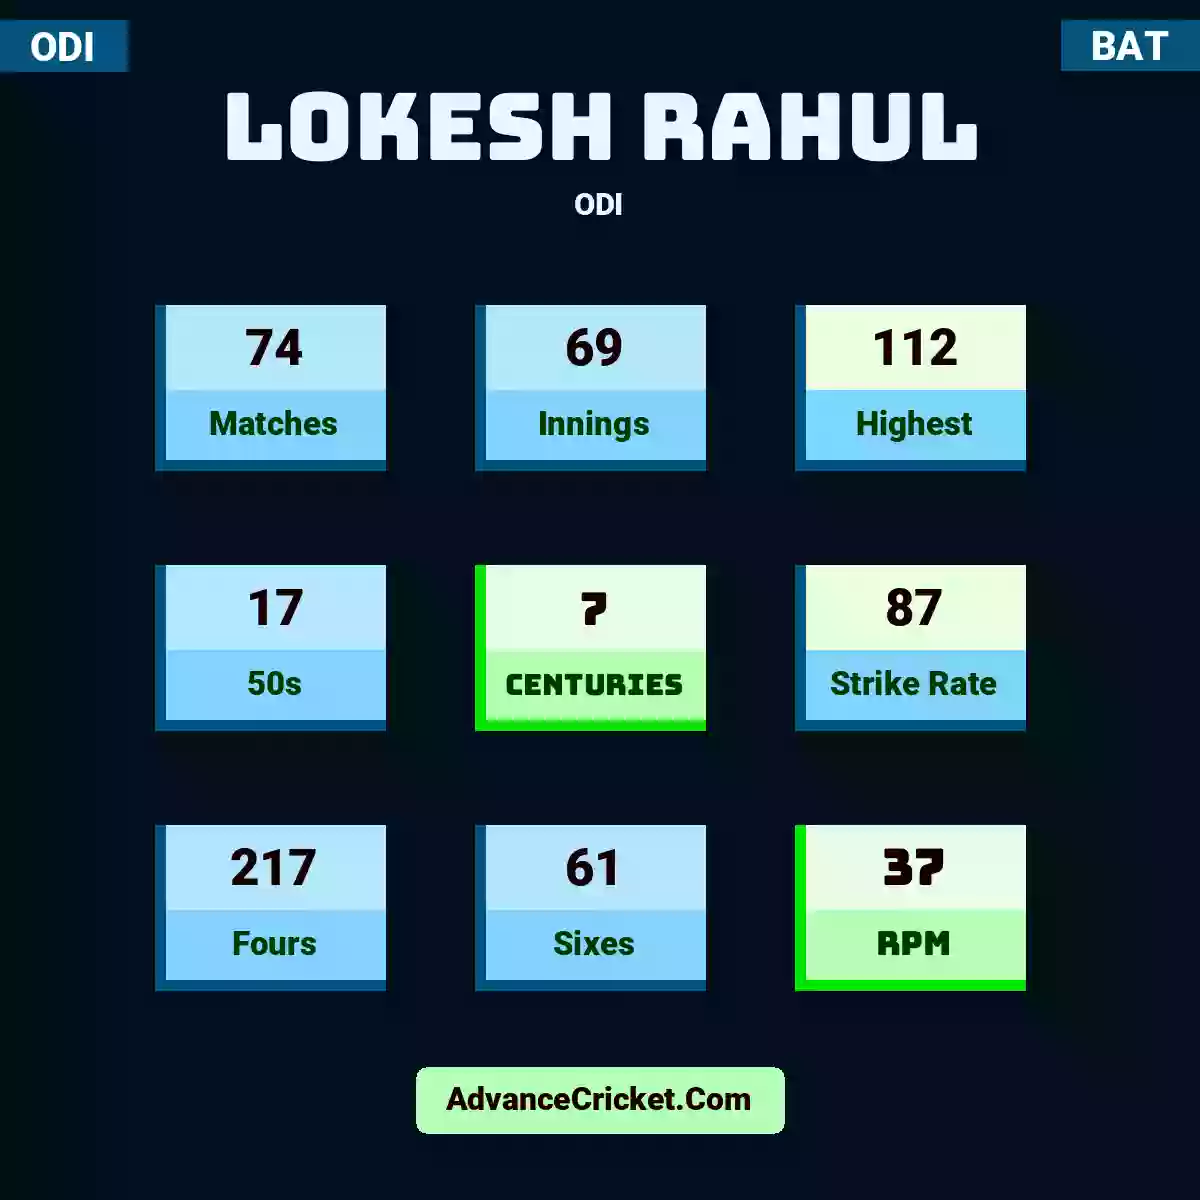 Lokesh Rahul ODI , Lokesh Rahul played 74 matches, scored 112 runs as highest, 17 half-centuries, and 7 centuries, with a strike rate of 87. KL.Rahul hit 217 fours and 61 sixes, with an RPM of 37.